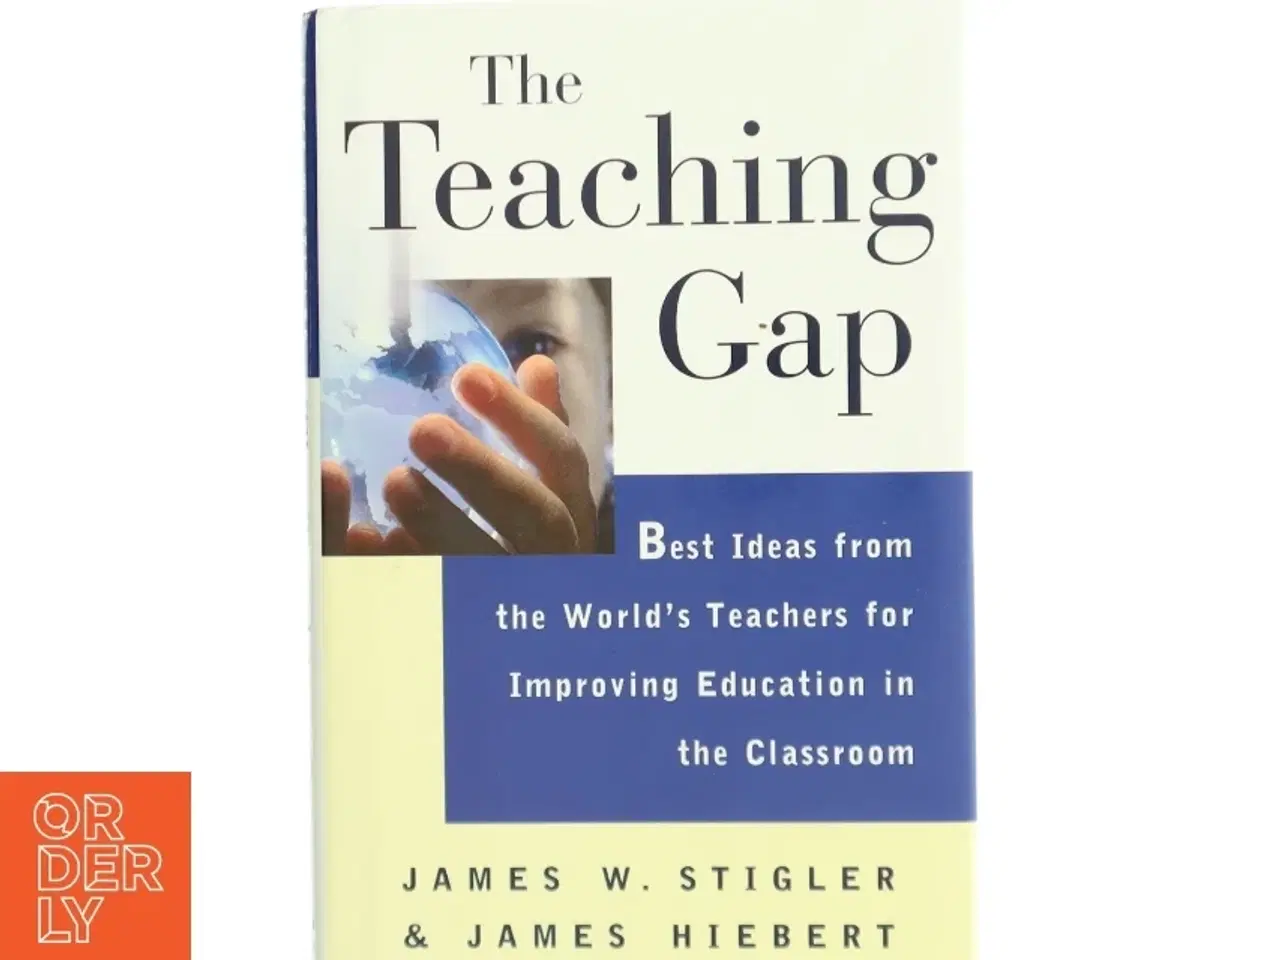 Billede 1 - 'The Teaching Gap - Best Ideas from the World's Teachers for Improving Education in the Classroom, by James W. Stigler, James Hiebert' (bog)